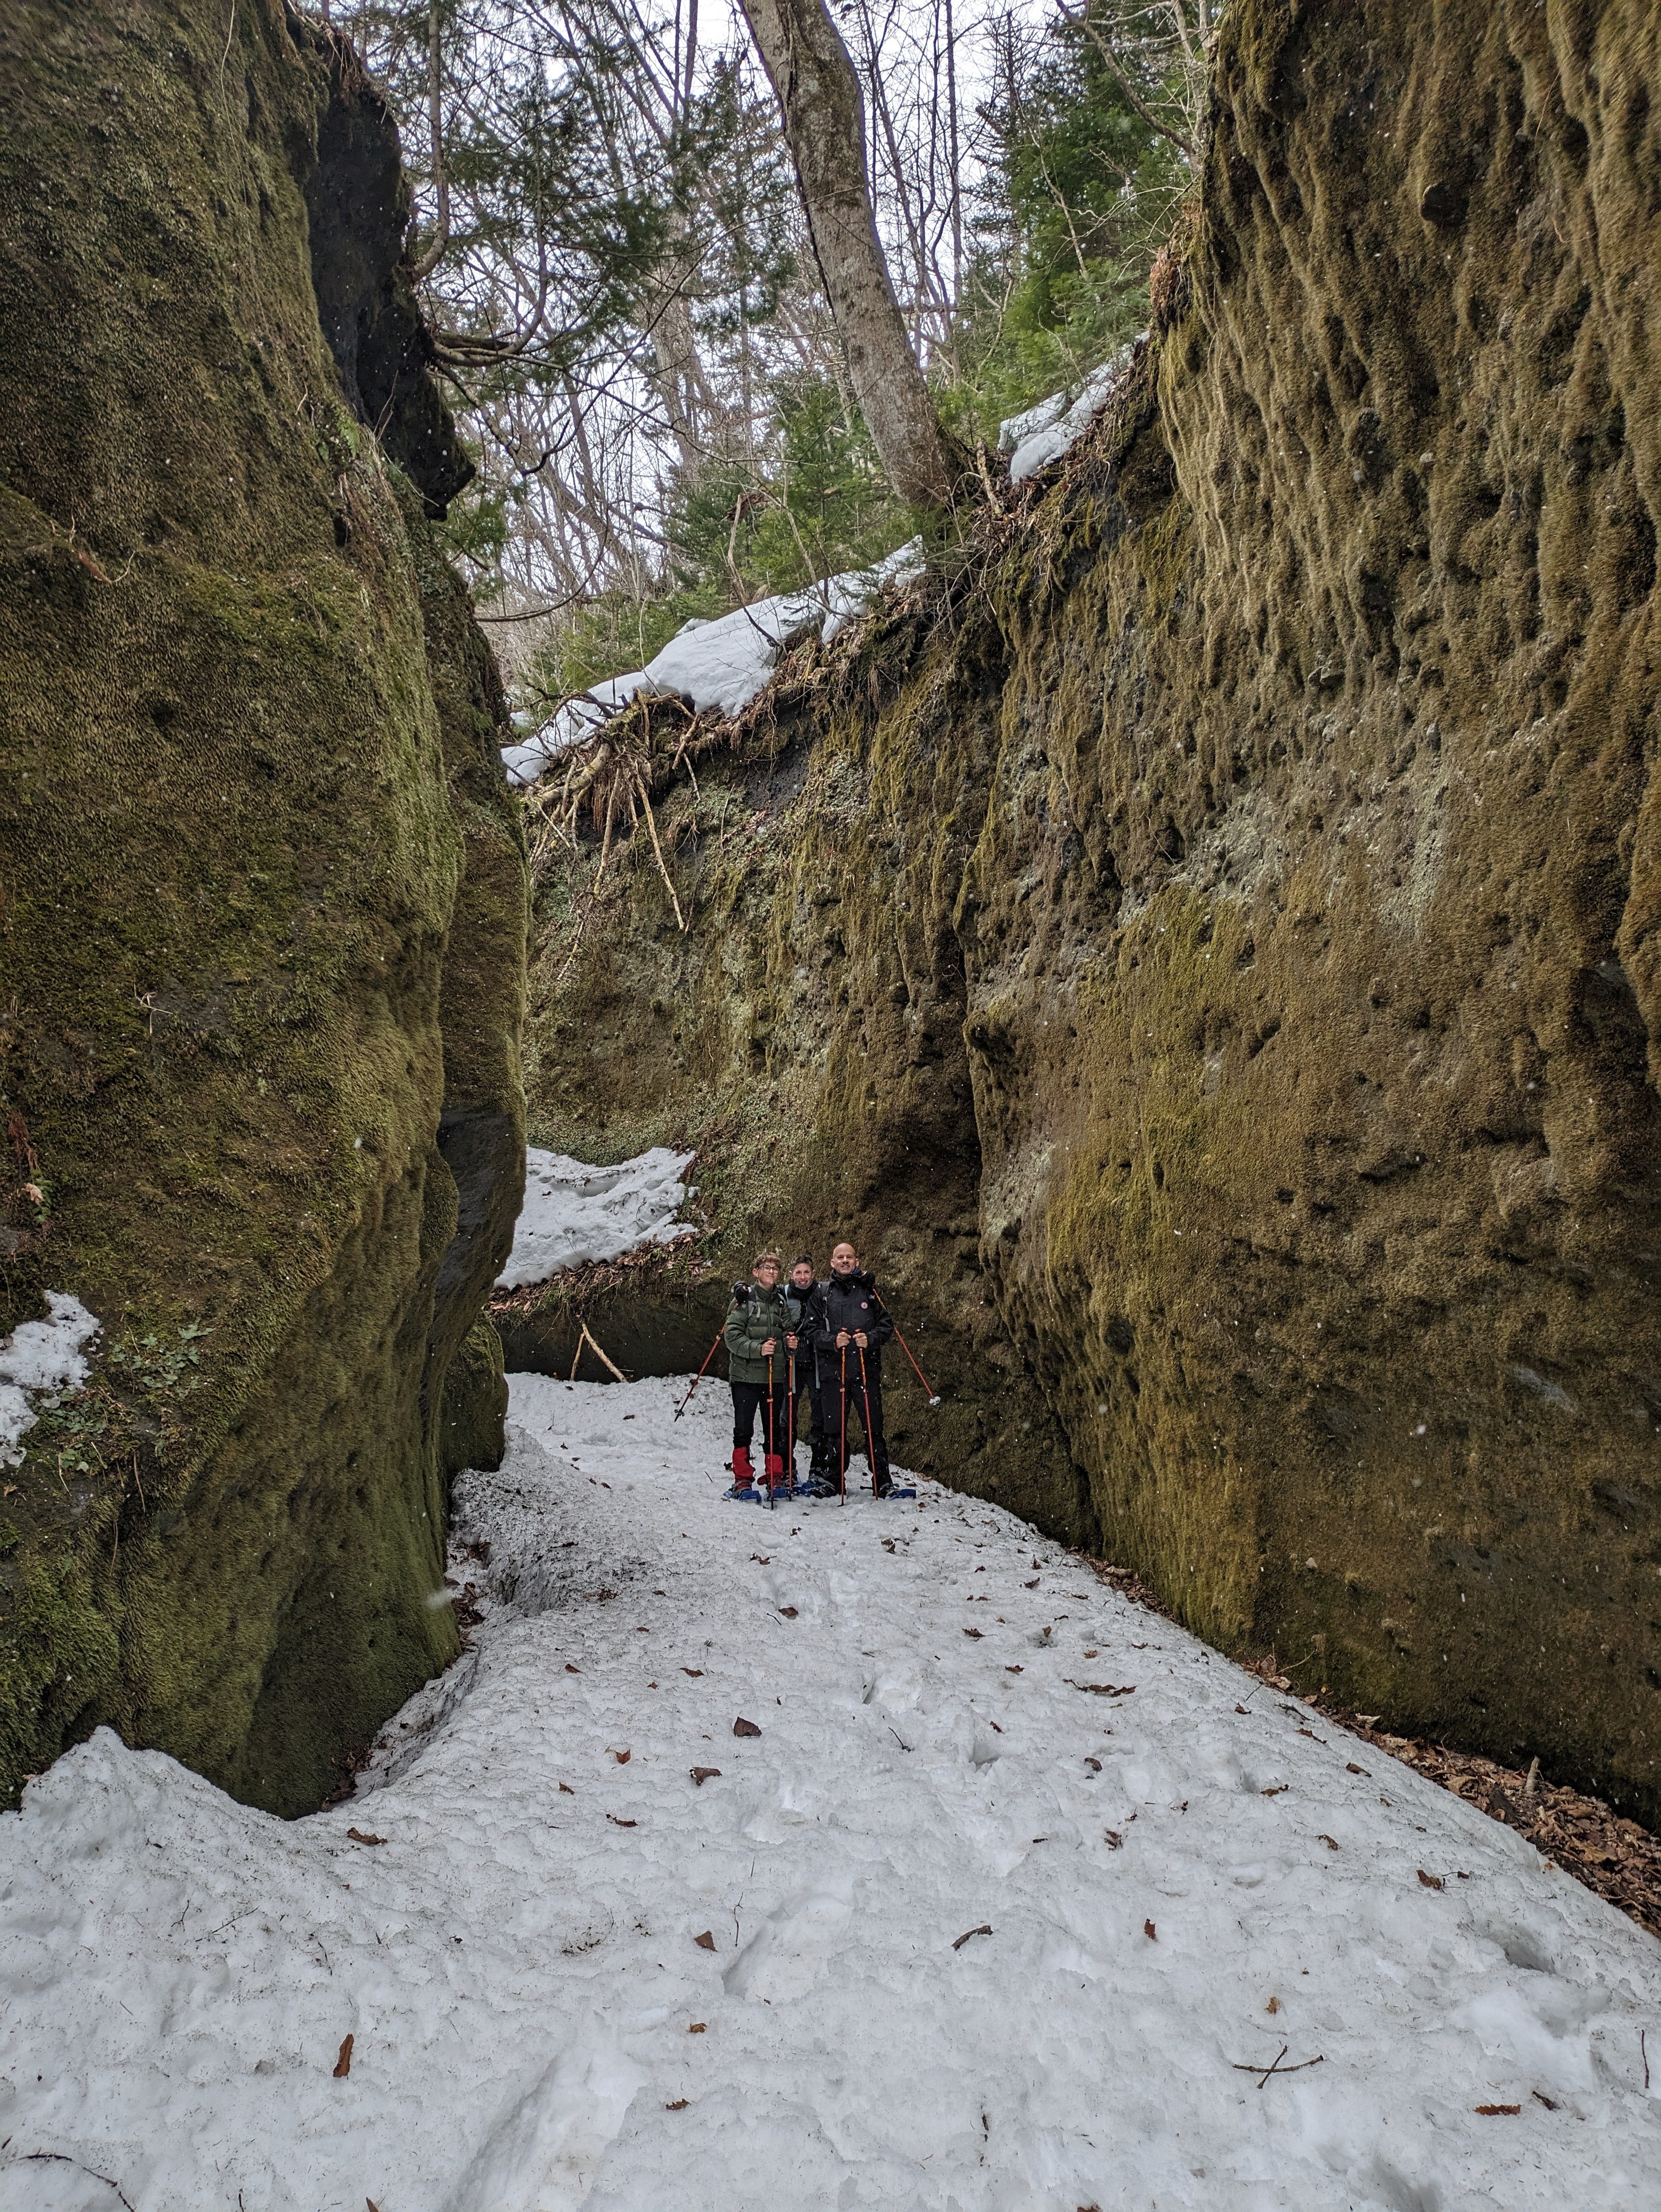 Three guests pose in the moss corridor at Mt. Tarumae on their snowshoeing excursion.